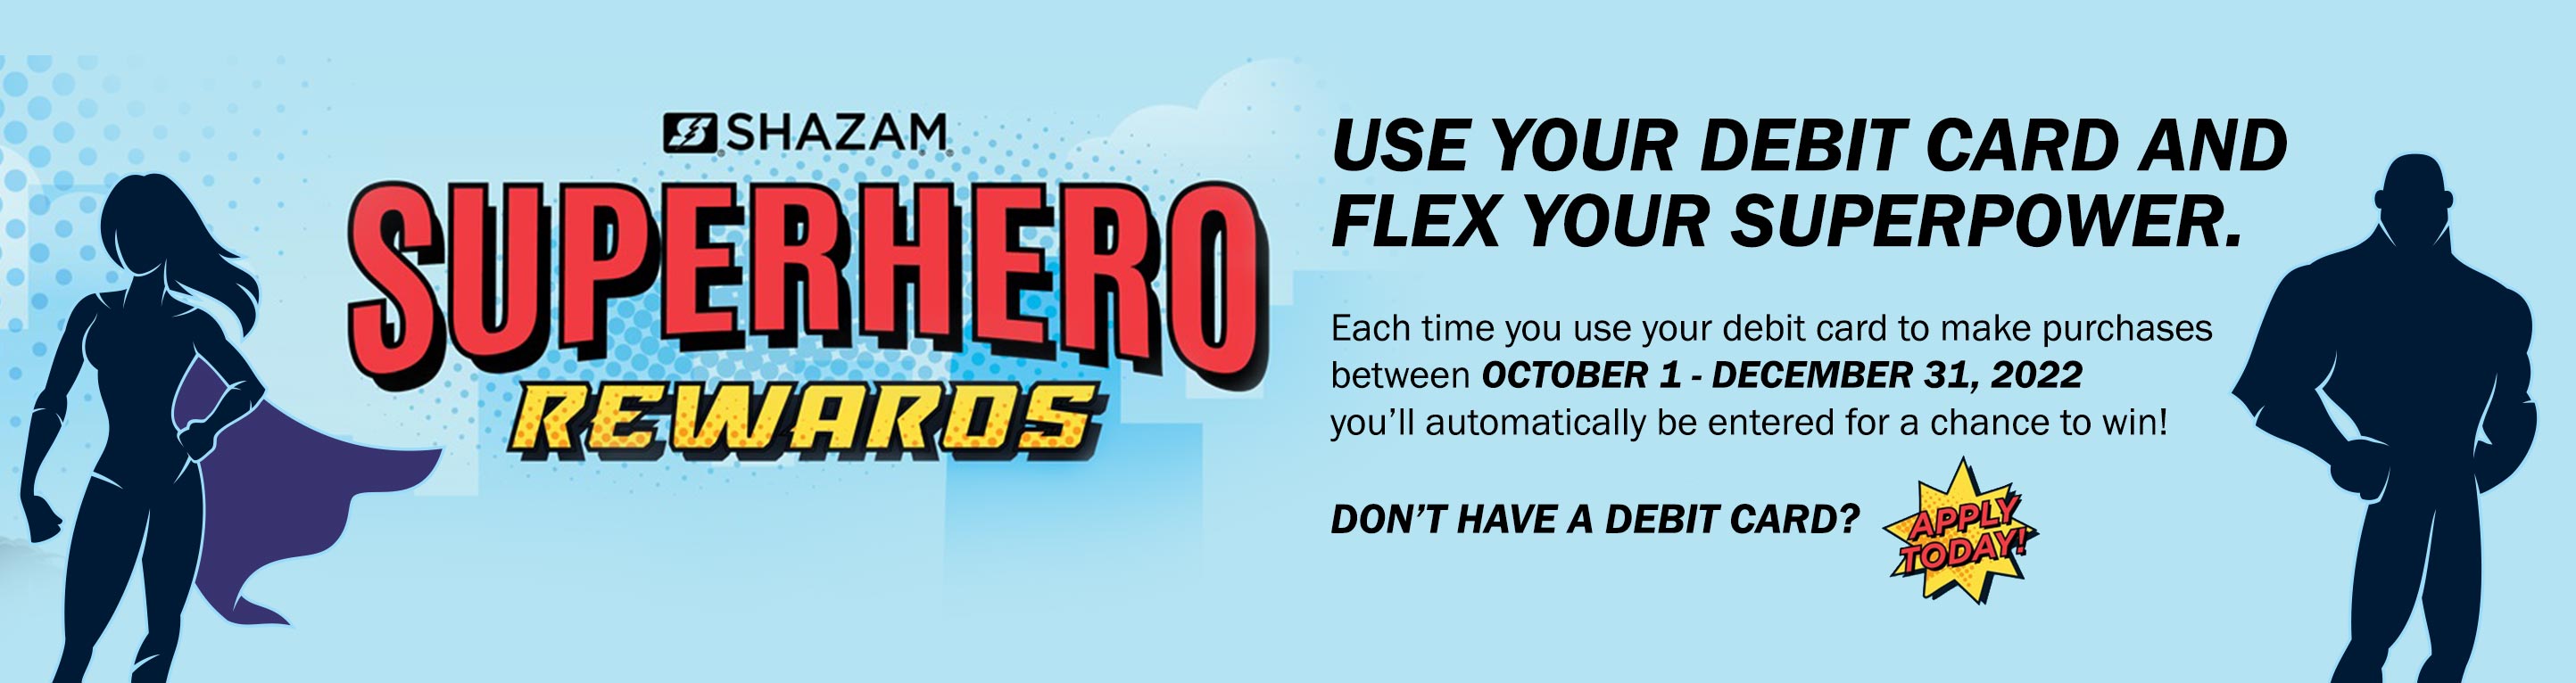 Superhero Rewards. Use your debit card and flex your superpower. Each time you use your debit card to make purchases between October 1 - December 31, 2022 you'll be entered to win. Don't have a debit card? Apply today